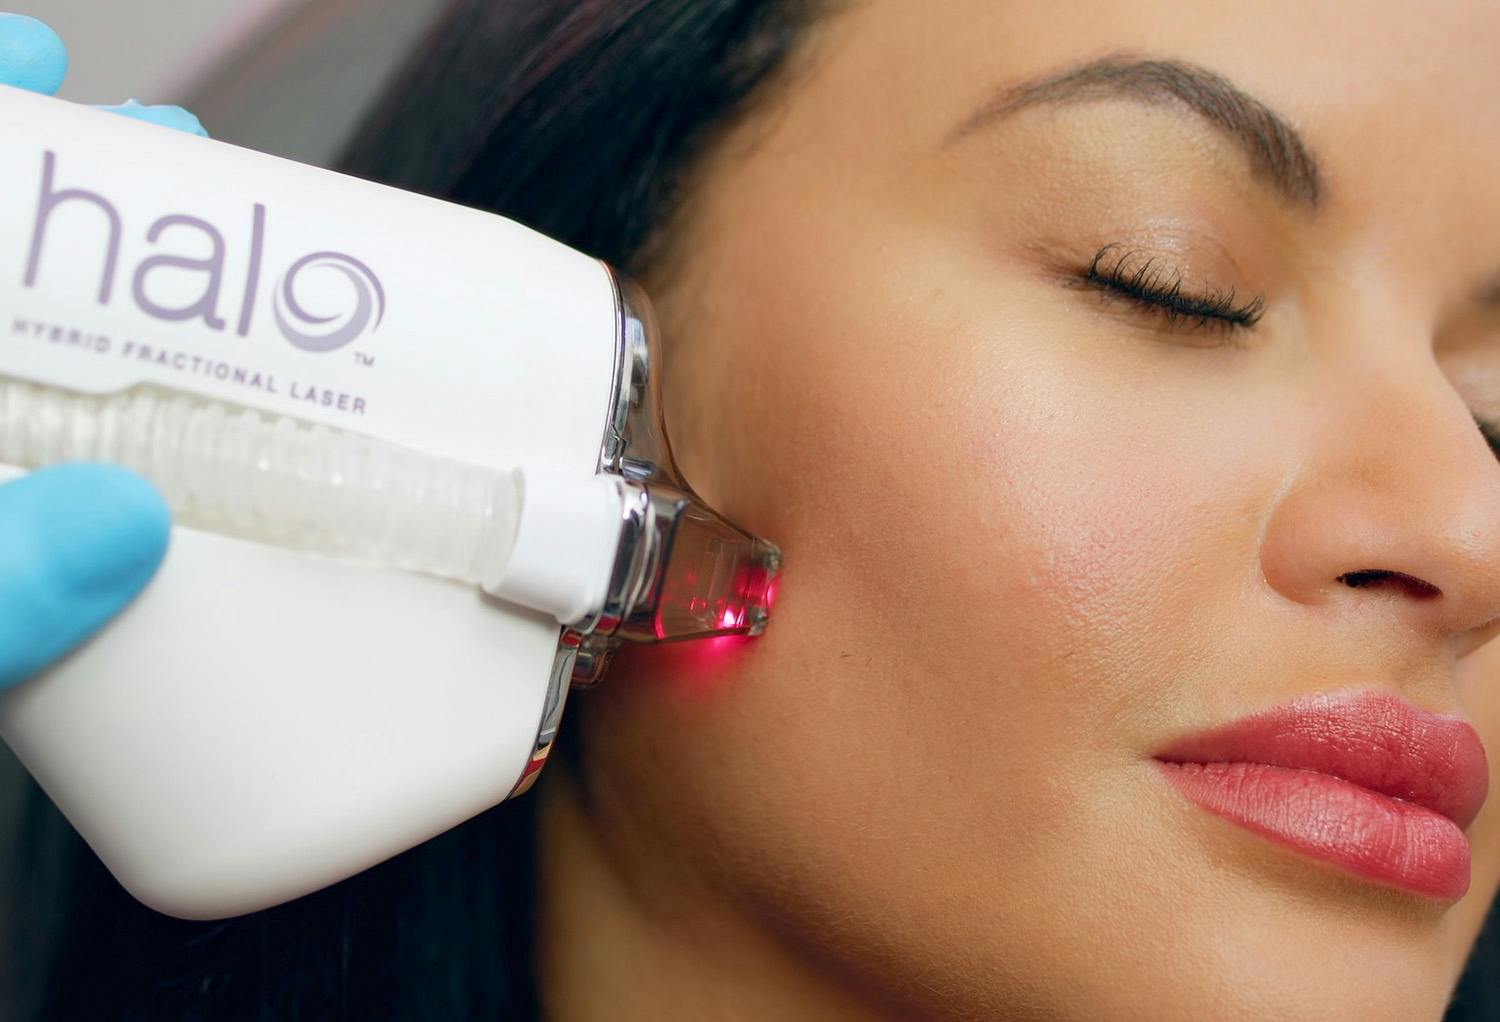 Woman Receiving Halo Laser Treatment